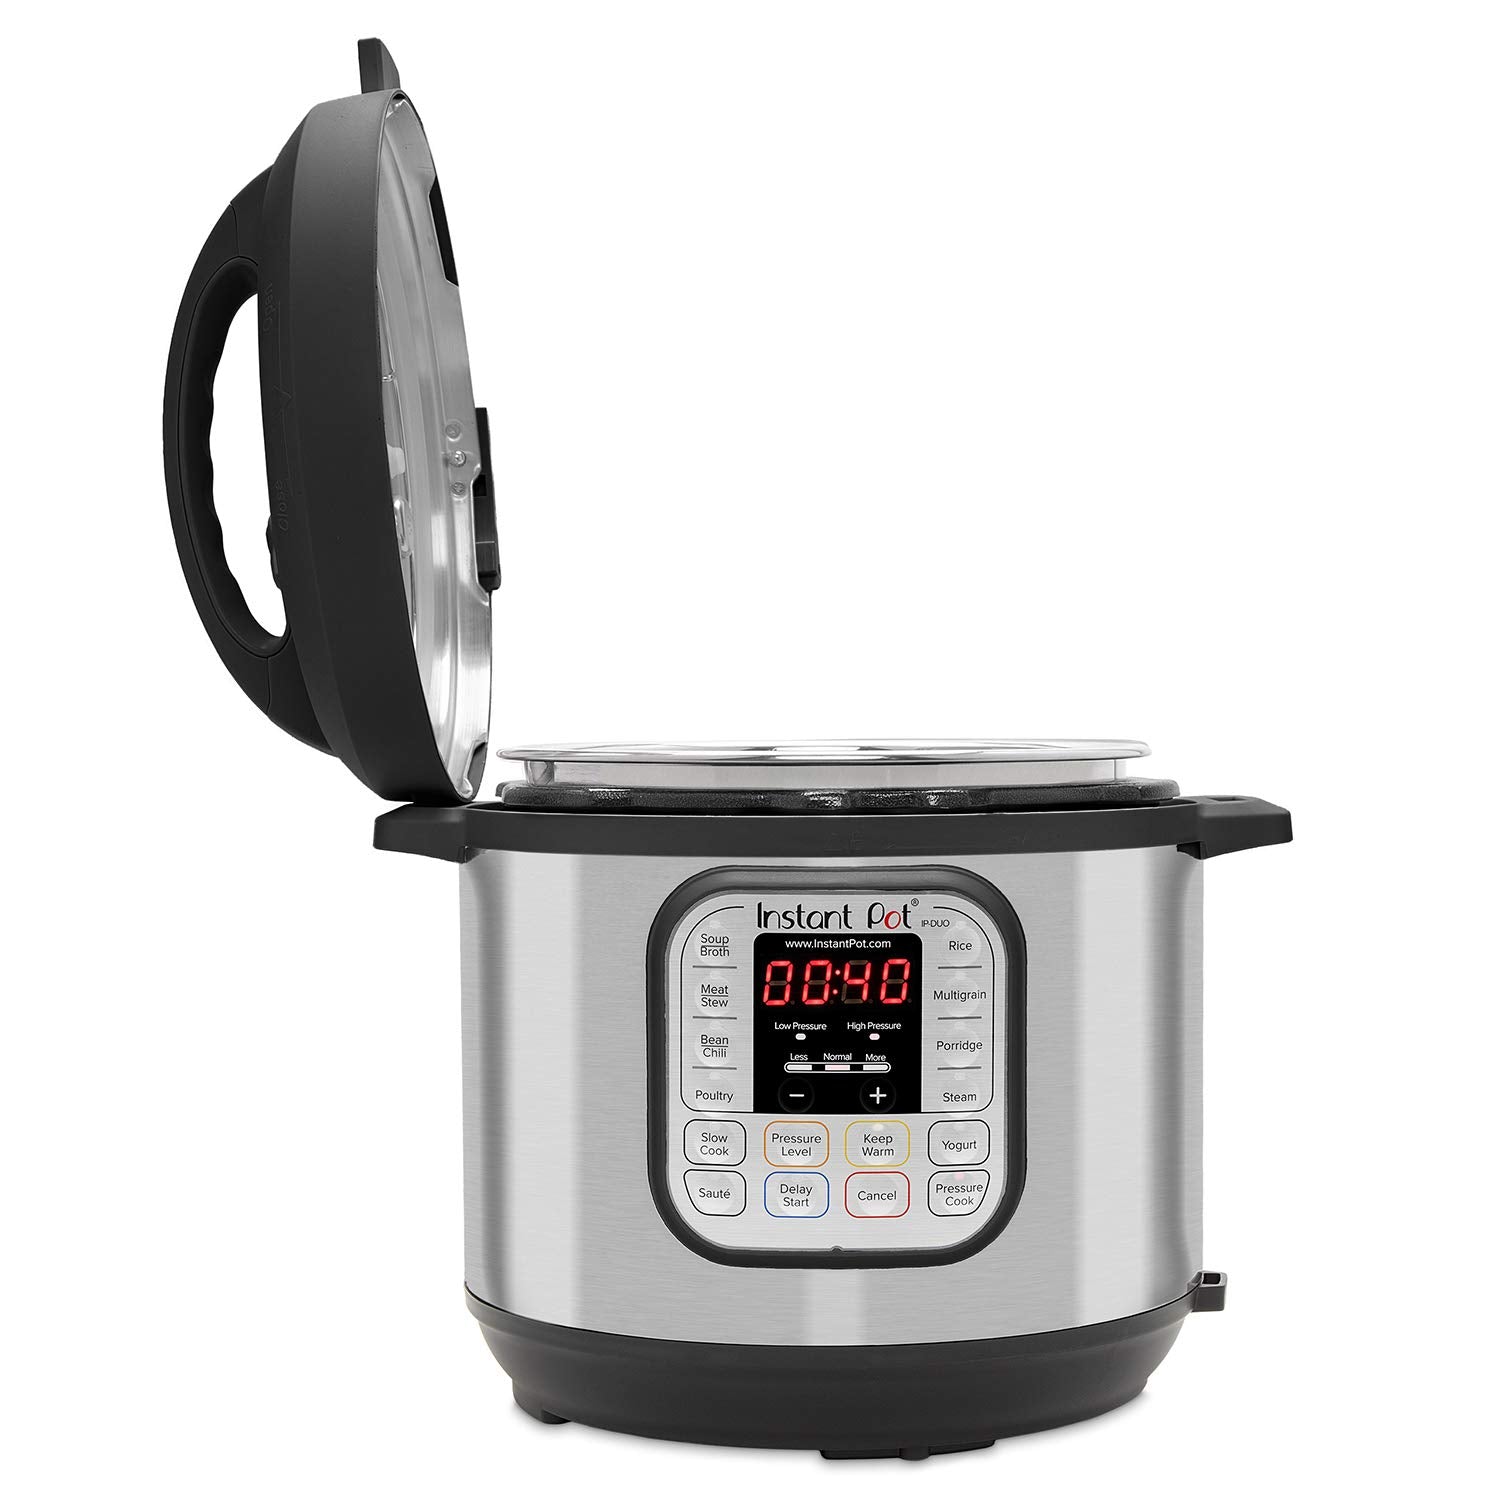 Instant Pot IP-DUO60 321 Electric Pressure Cooker, 6-QT, Stainless